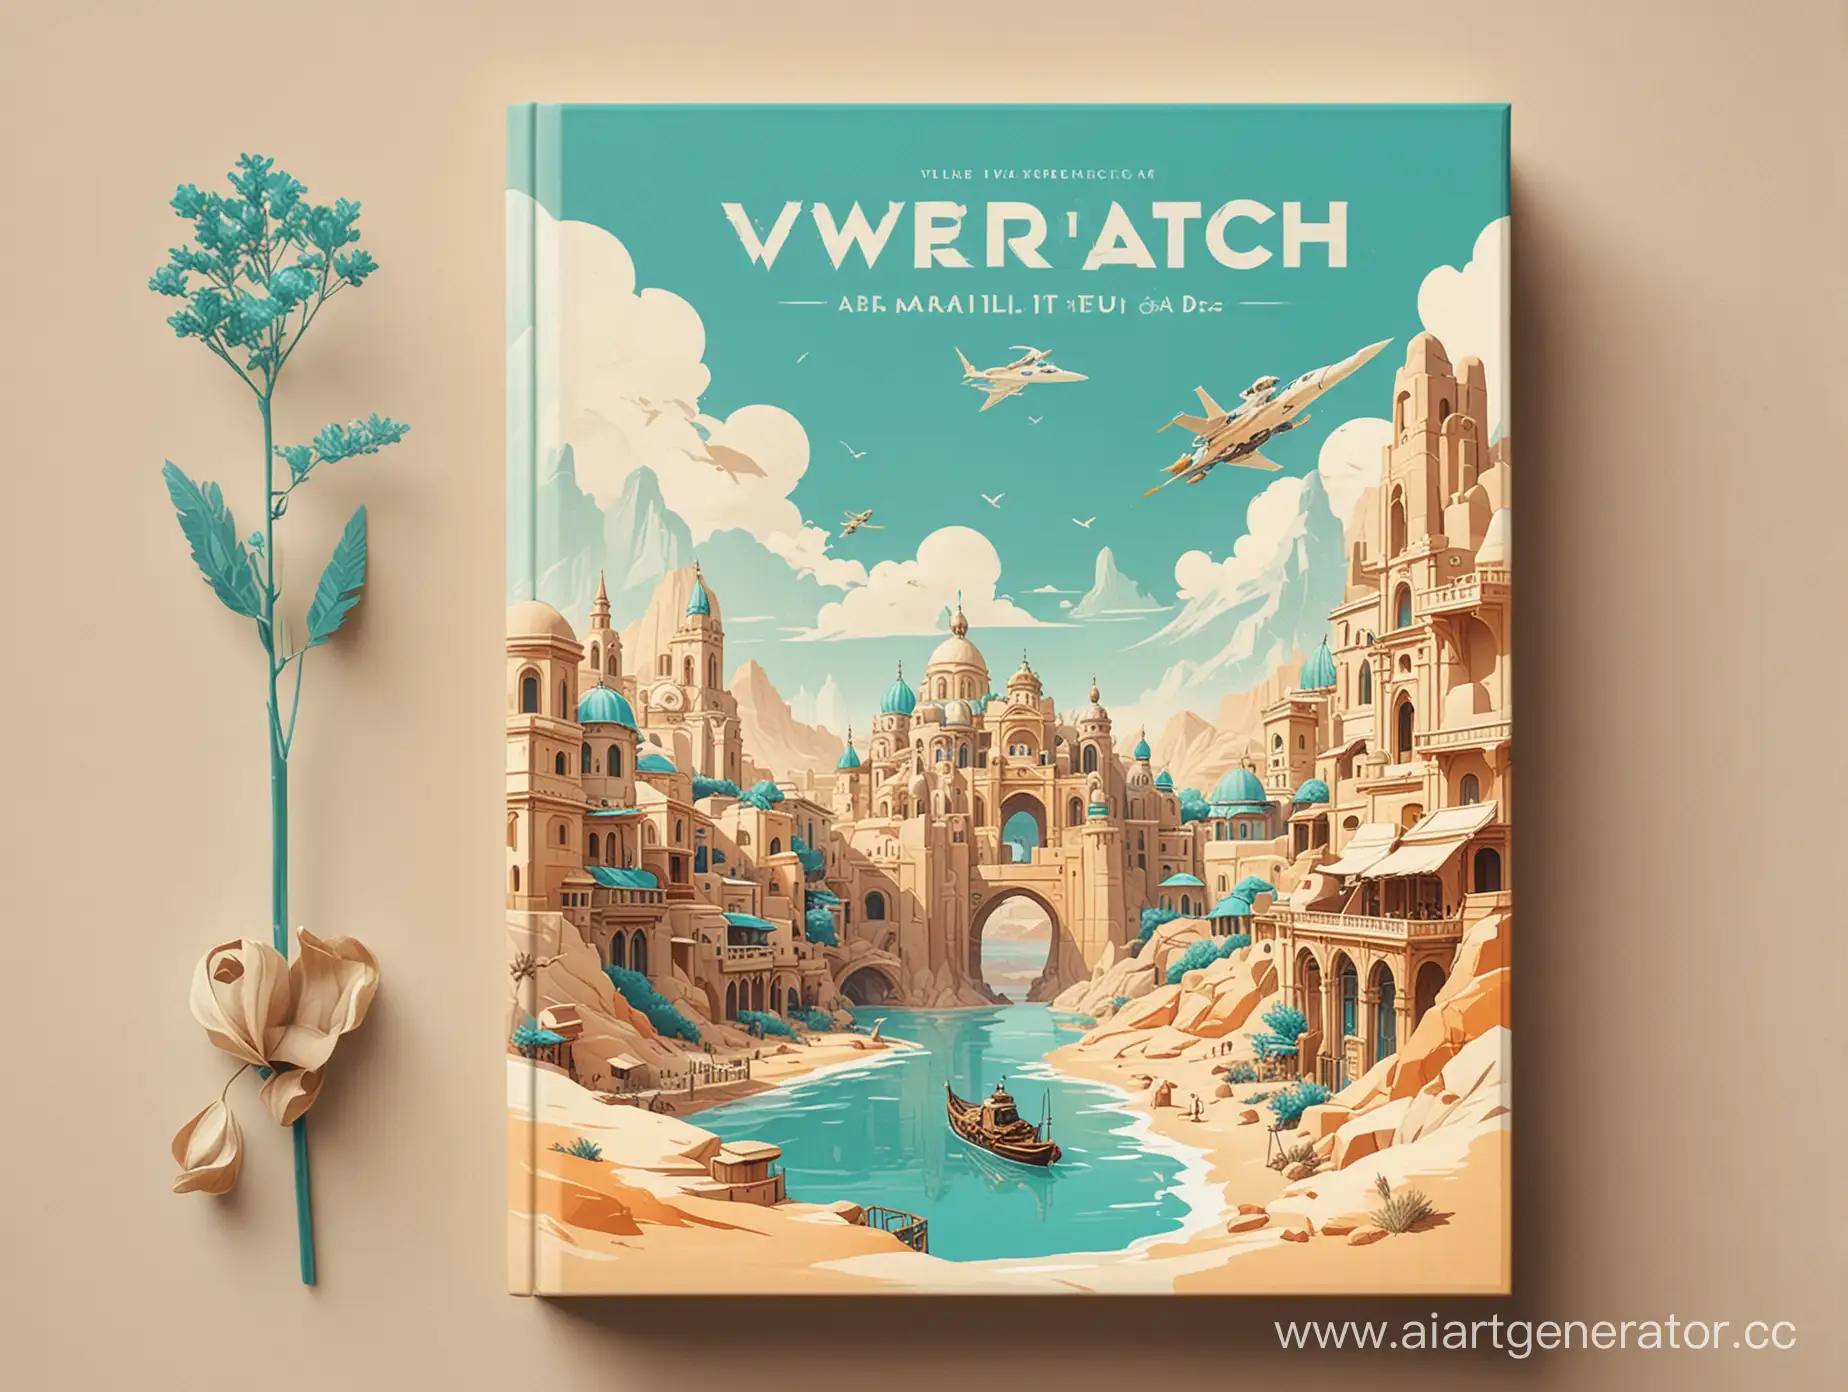 World-Landmarks-Travel-Adventure-in-Turquoise-and-Beige-Overwatch-Inspired-Book-Cover